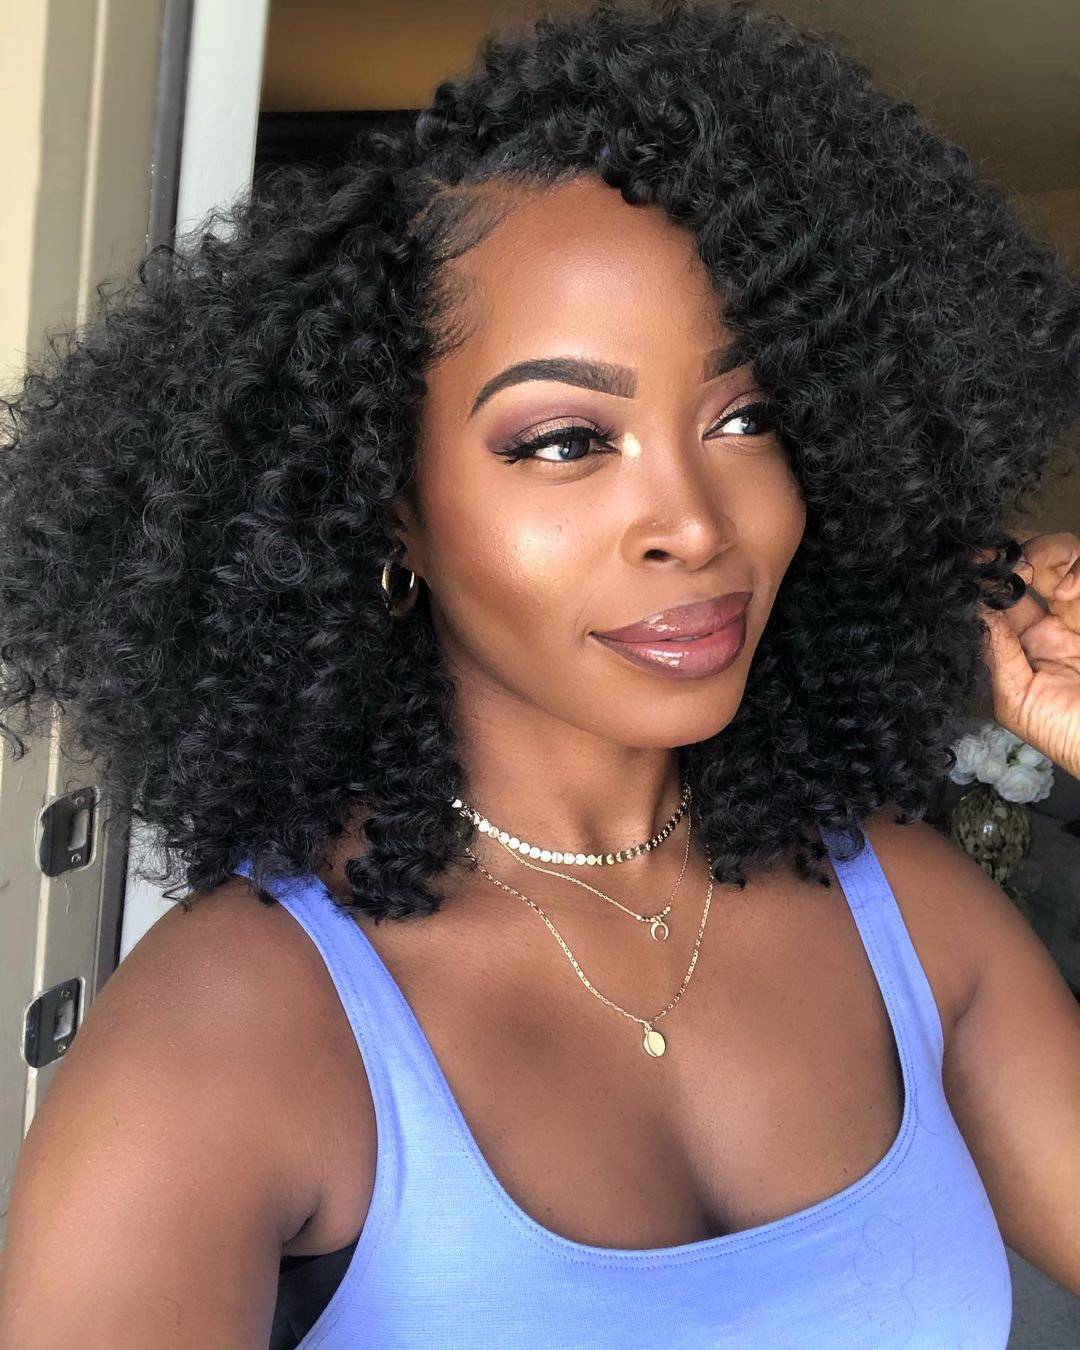 Black hairstyles for women NHP Approved 2021